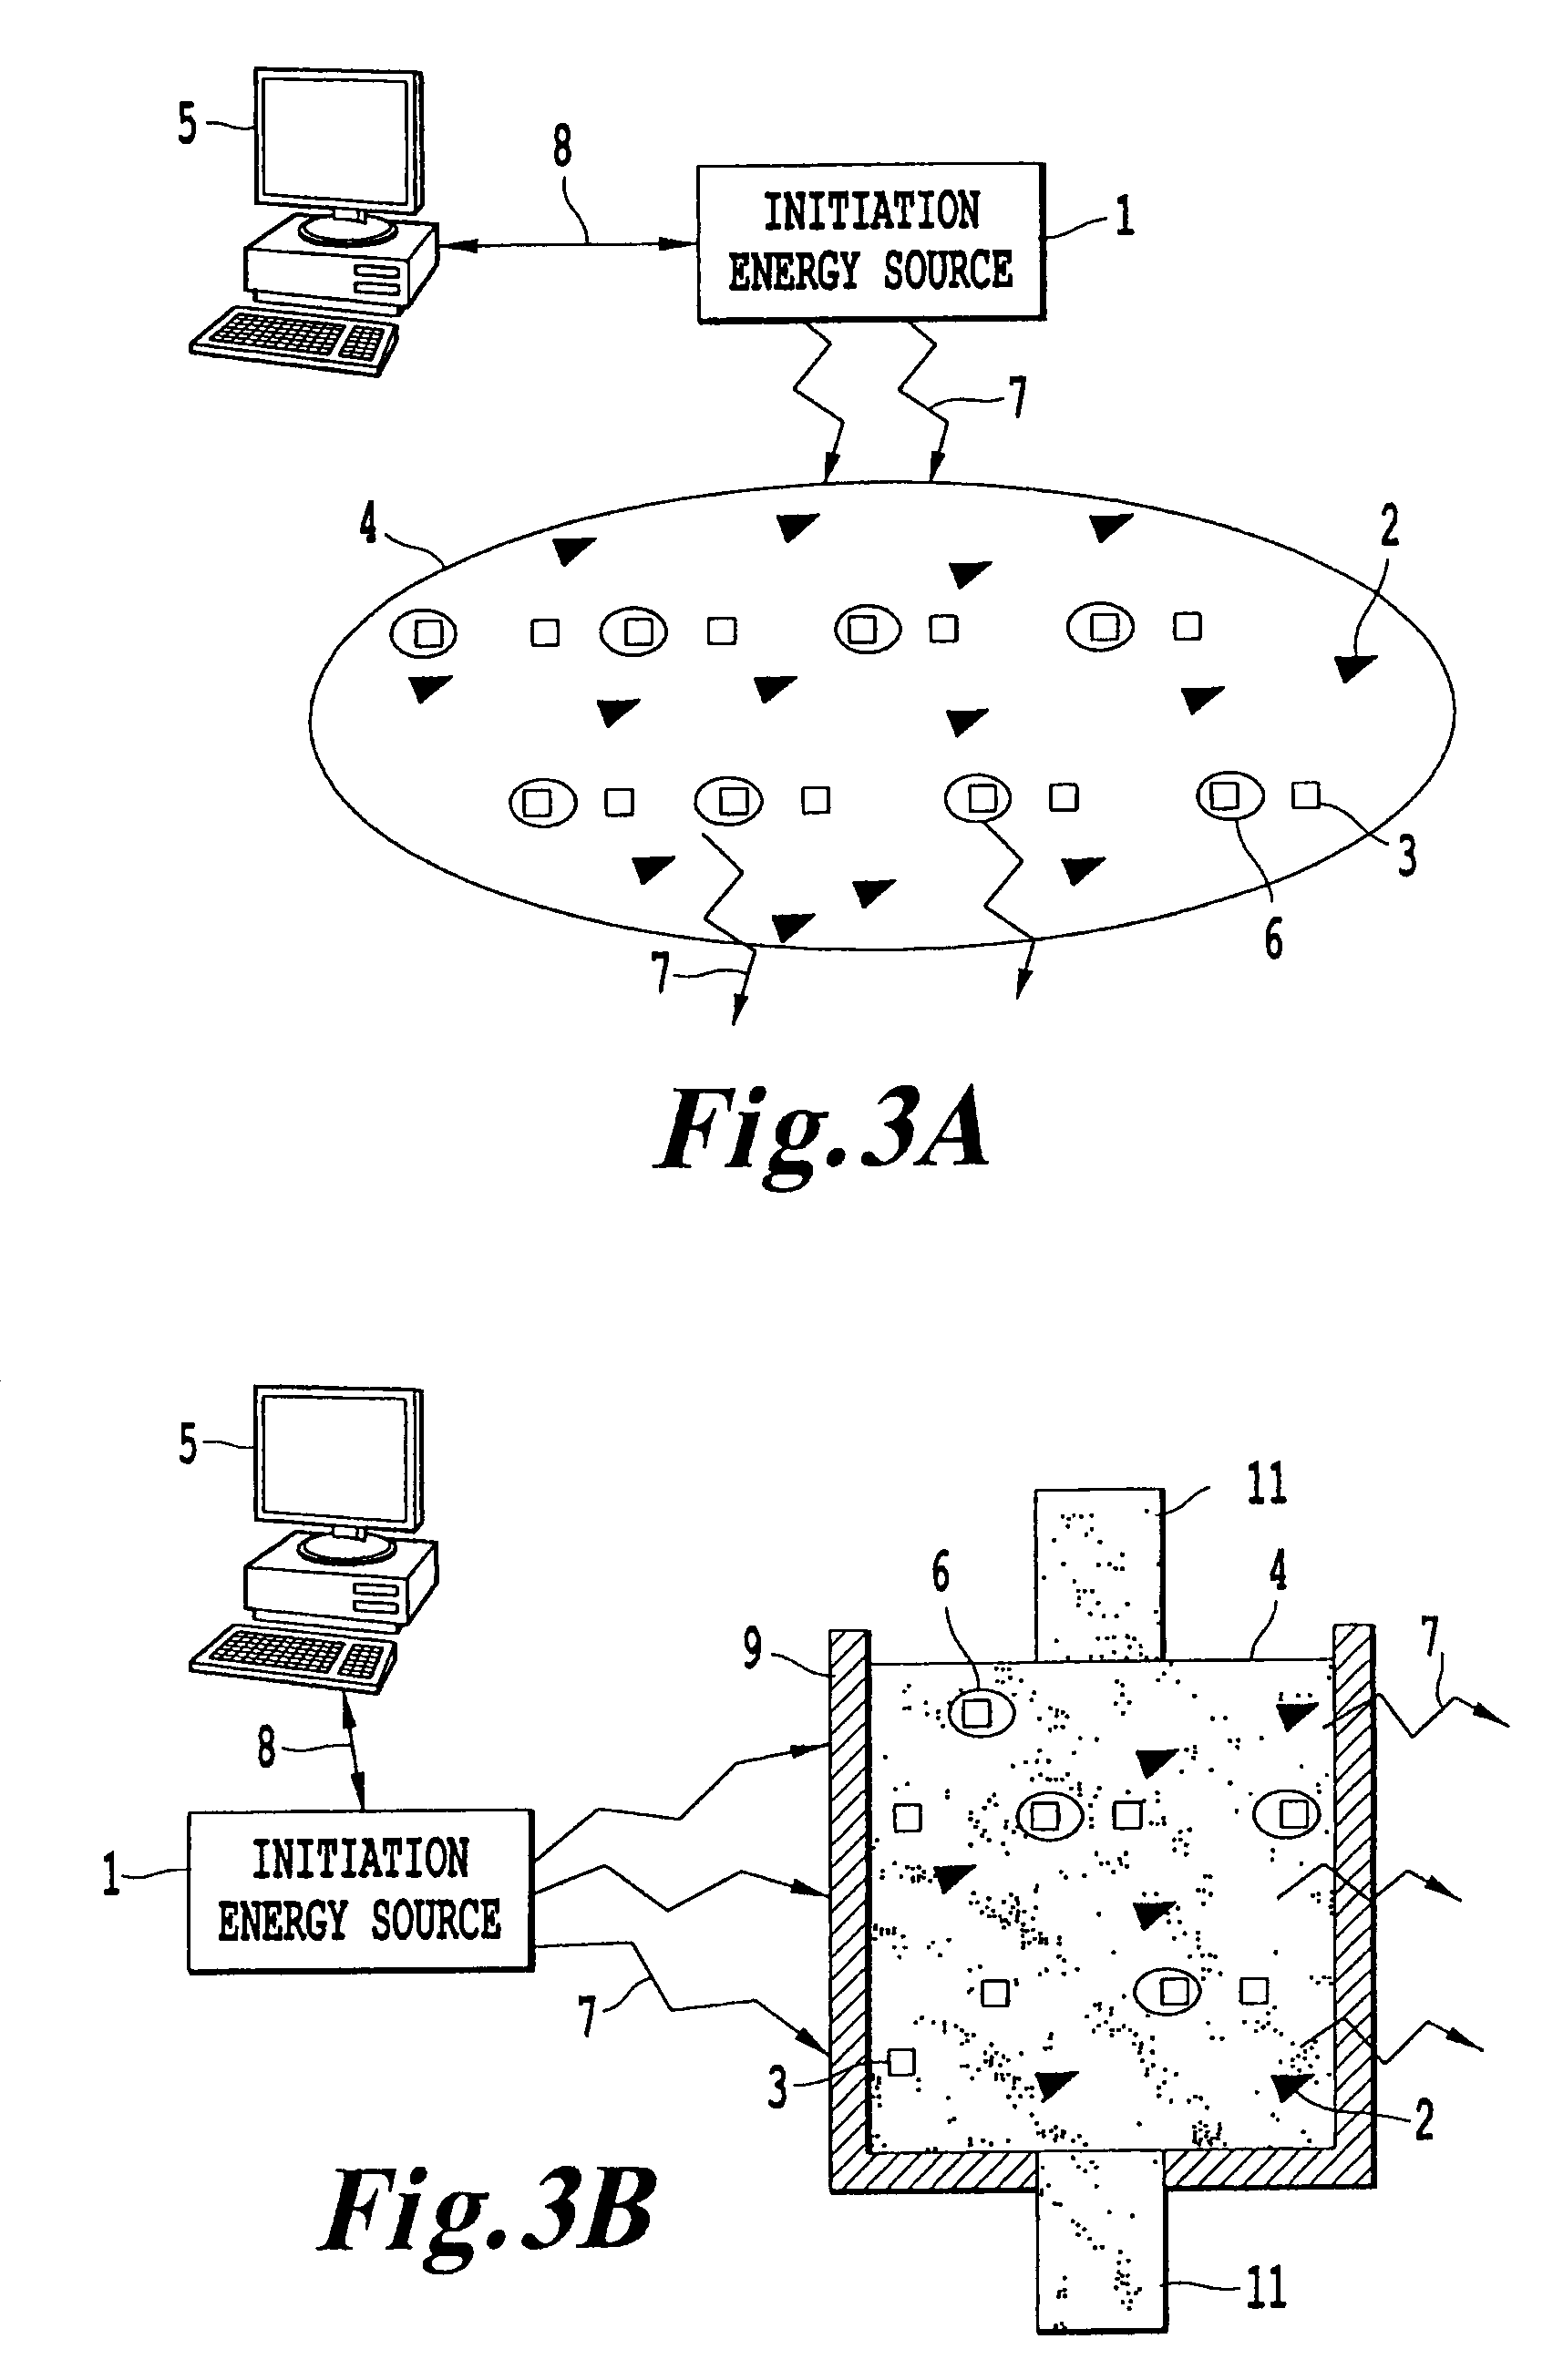 Plasmonic assisted systems and methods for interior energy-activation from an exterior source